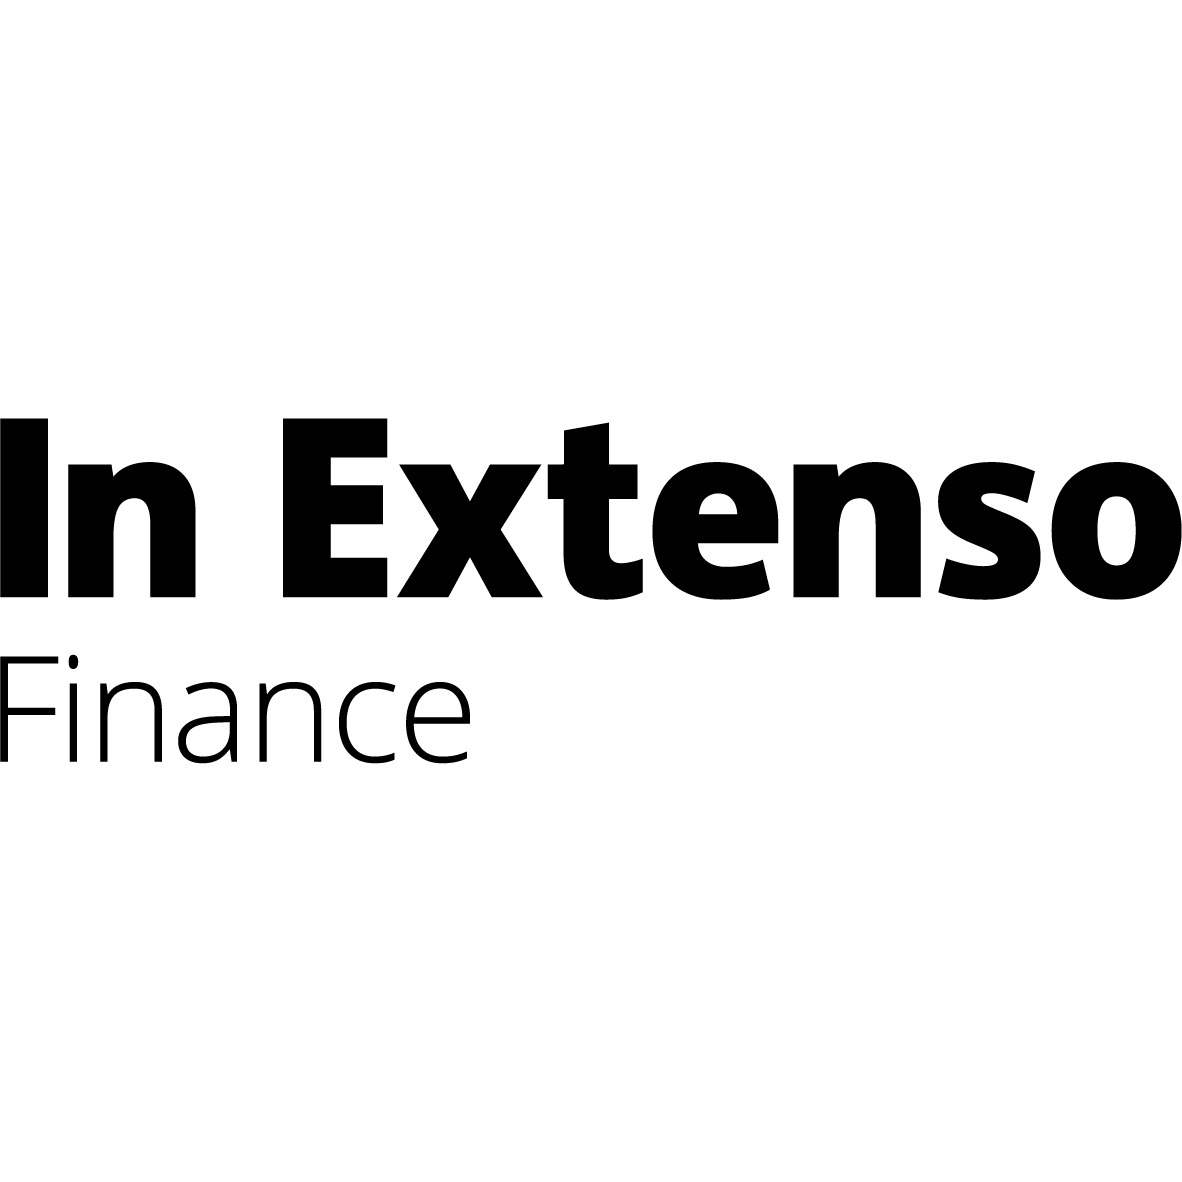 In Extenso Finance & Transmission